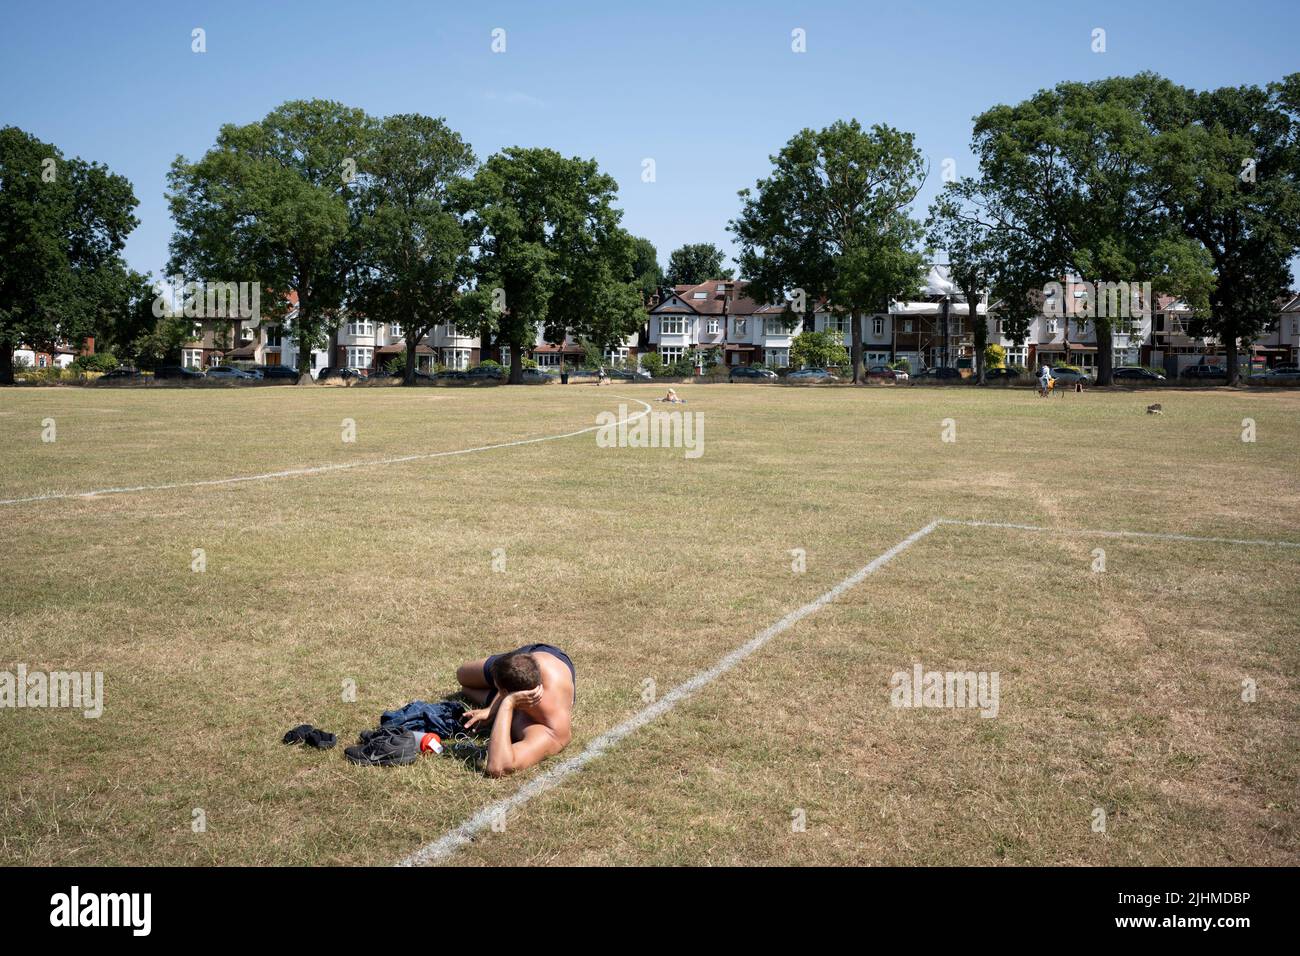 On the day that the UK experienced its highest recorded temperature of 40.3 degrees centigrade (104.5 Fahrenheit), an historical heatwave in Conningsby, Lincolnshire - rail travel was disrupted and major grassland fires broke out, a sunbather enjoys the sun in Ruskin Park, on 19th July 2022, in London, England. The Met Office has in recent days issued  notices to the public - a severe warning of risk to life. Stock Photo